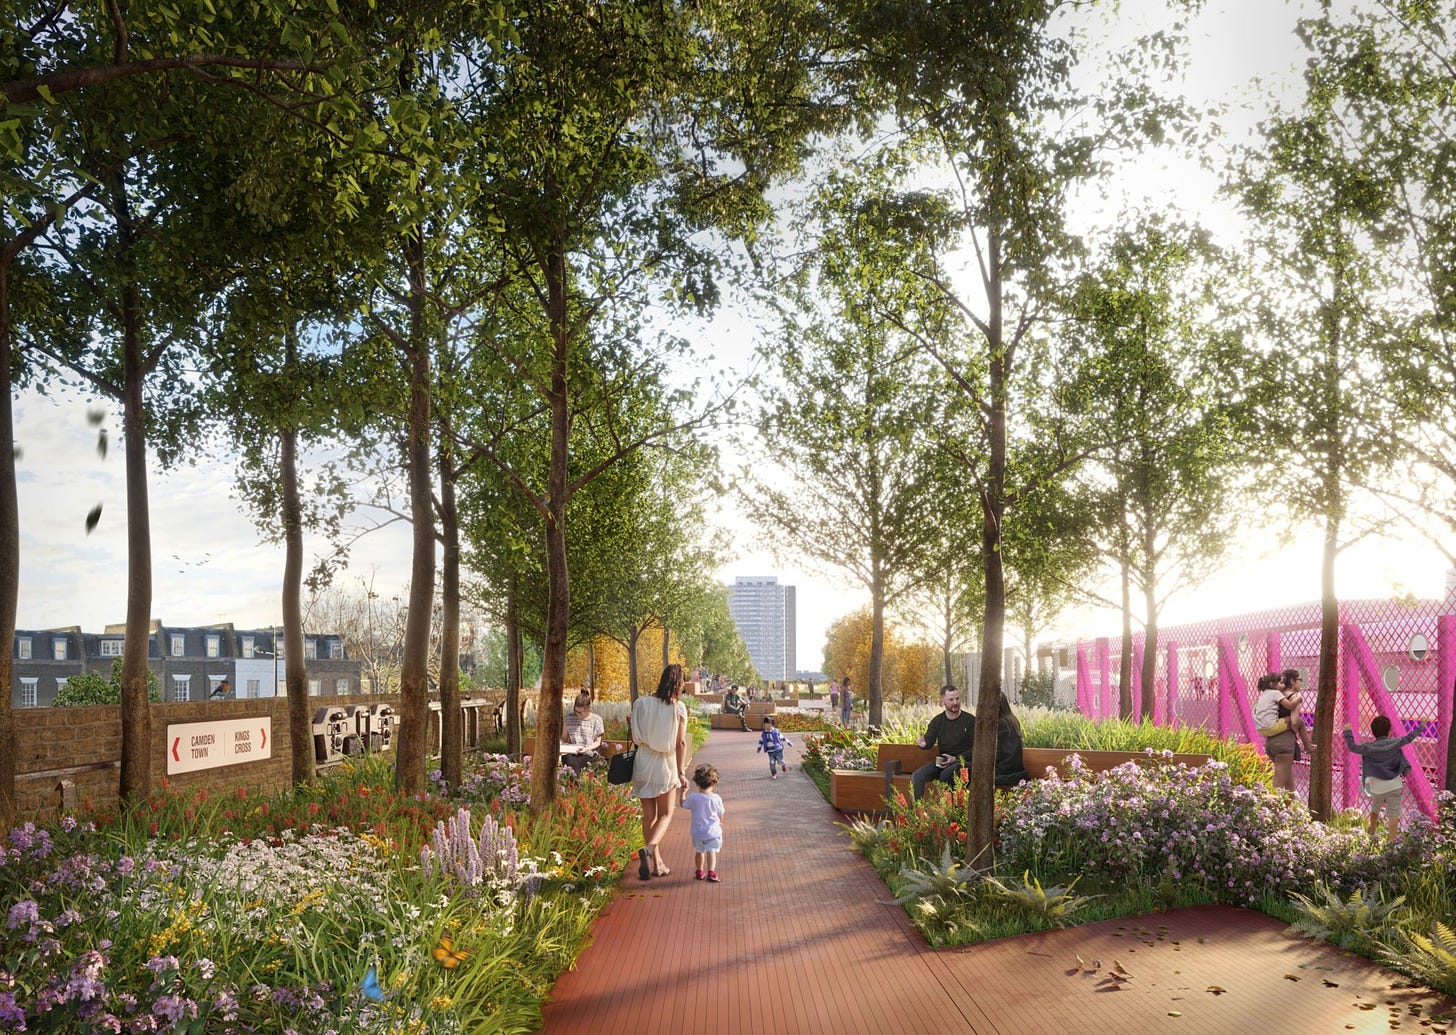 A rendering of Camden Highline as it may appear upon completion.